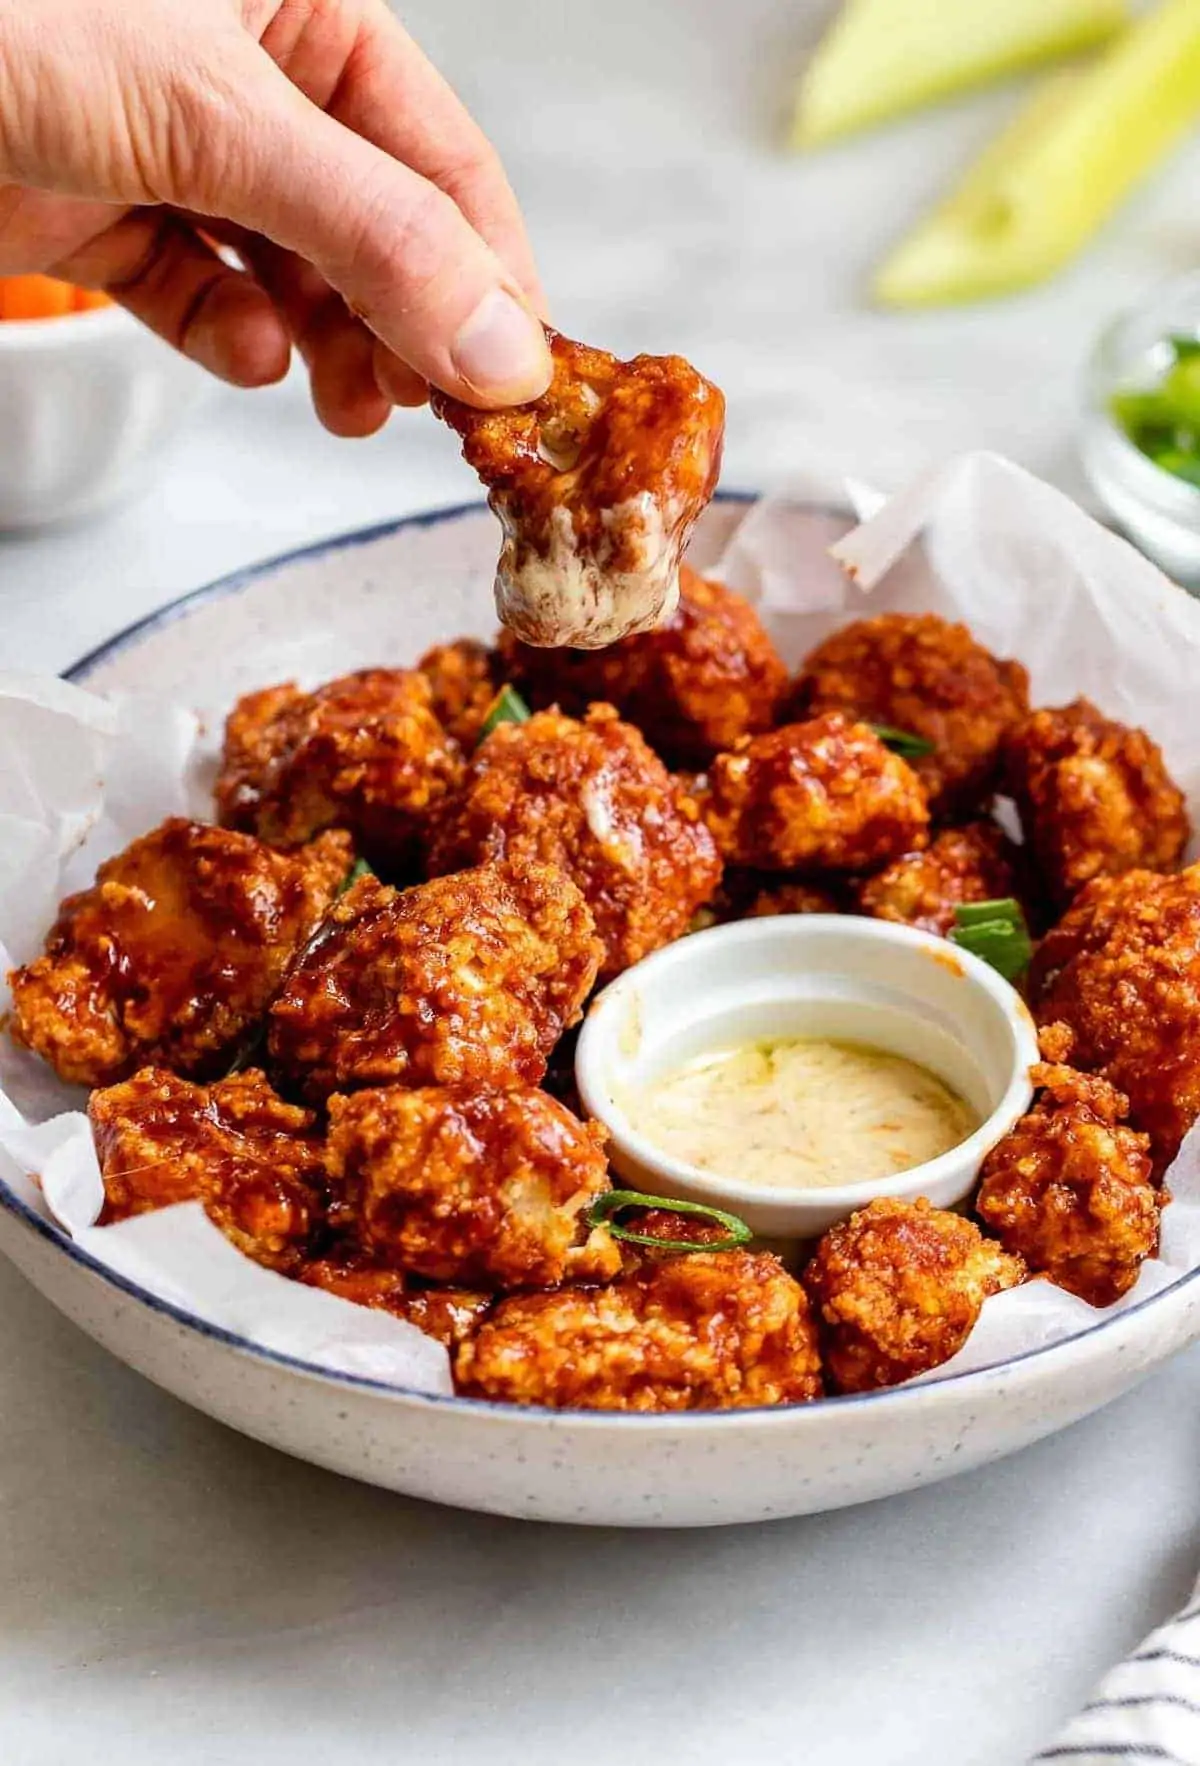 Dipping a bbq cauliflower wing into ranch.